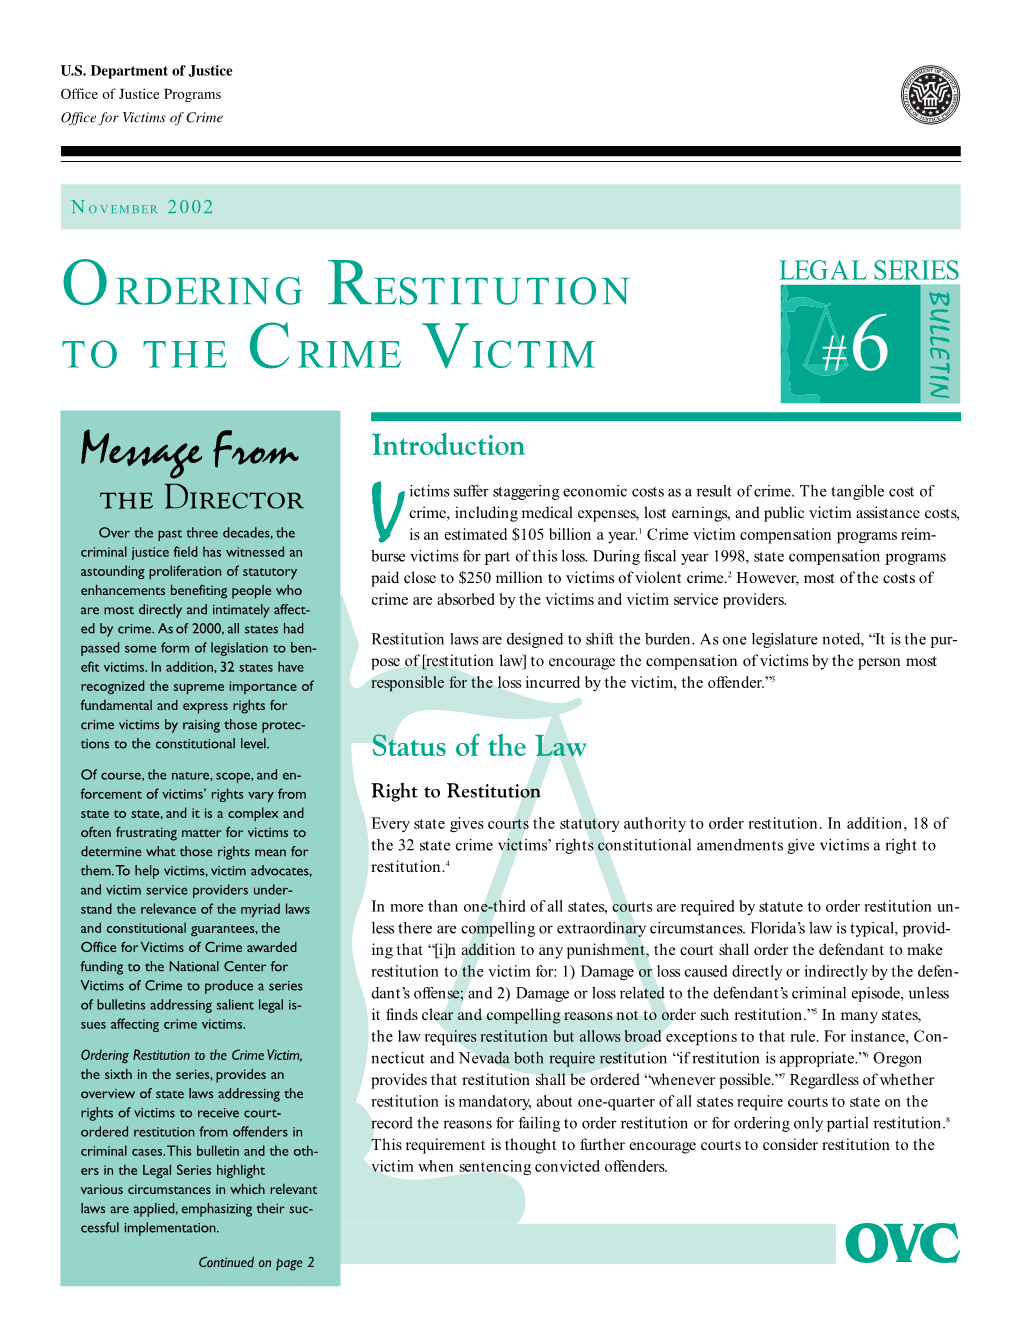 Legal Series Bulletin #6: Ordering Restitution to the Crime Victim